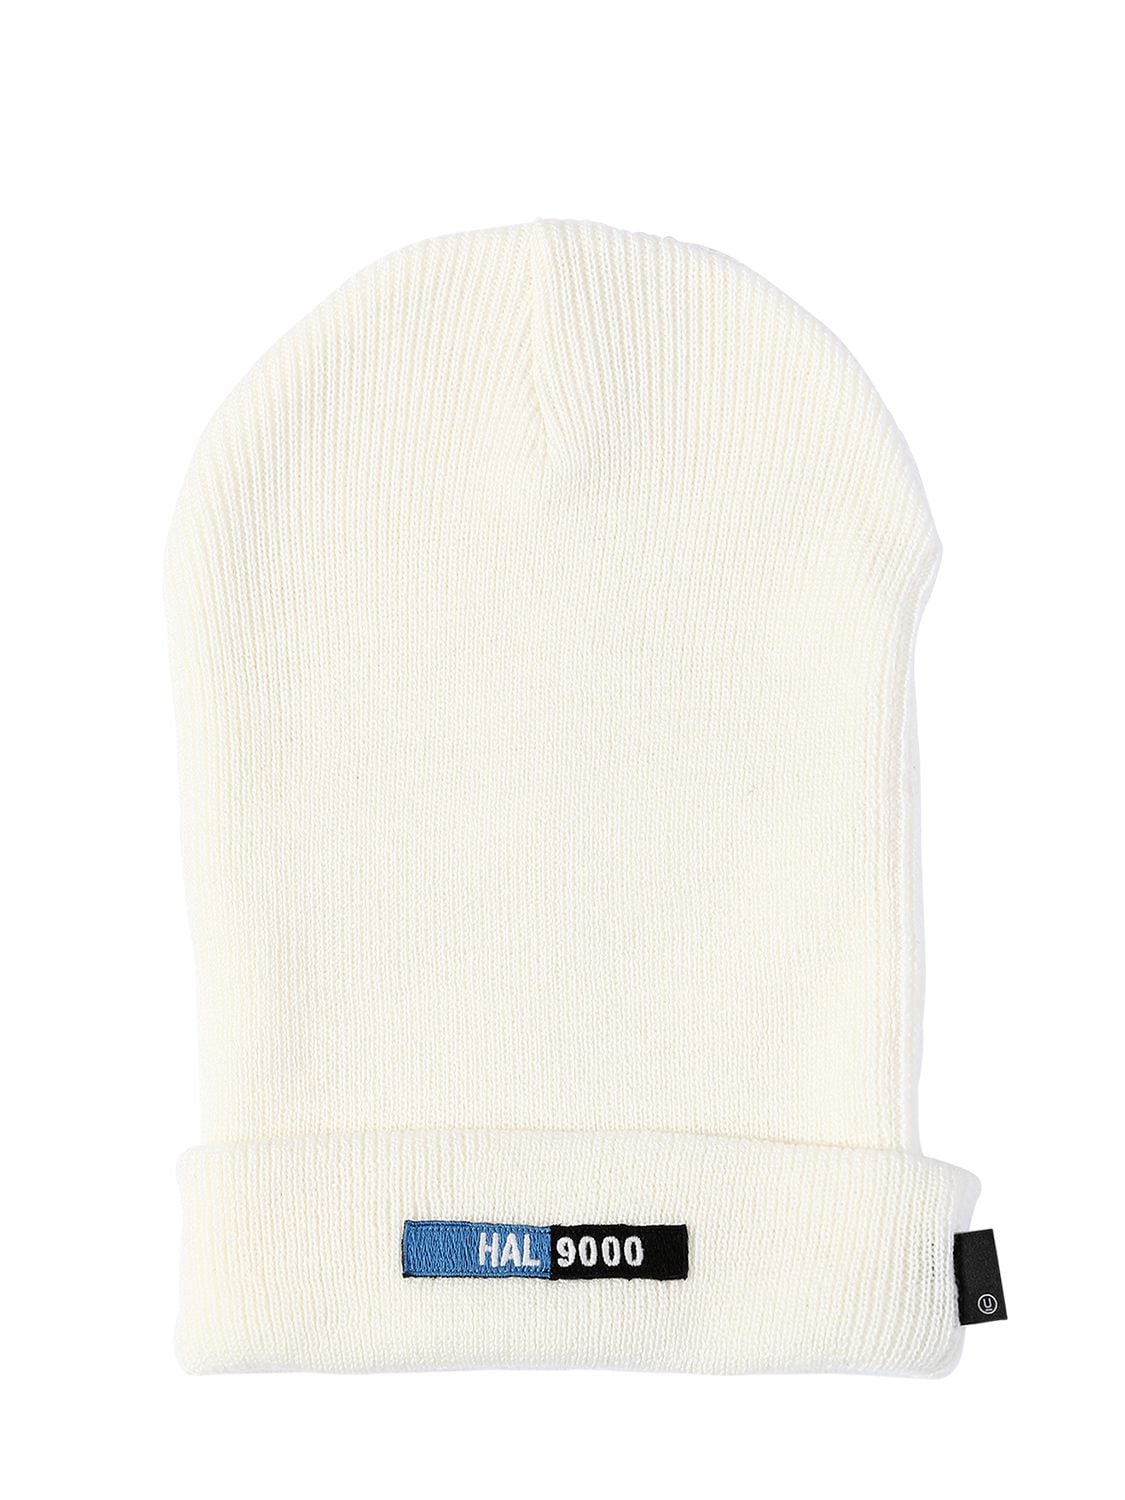 Undercover Patch Wool Blend Knit Beanie Hat In White